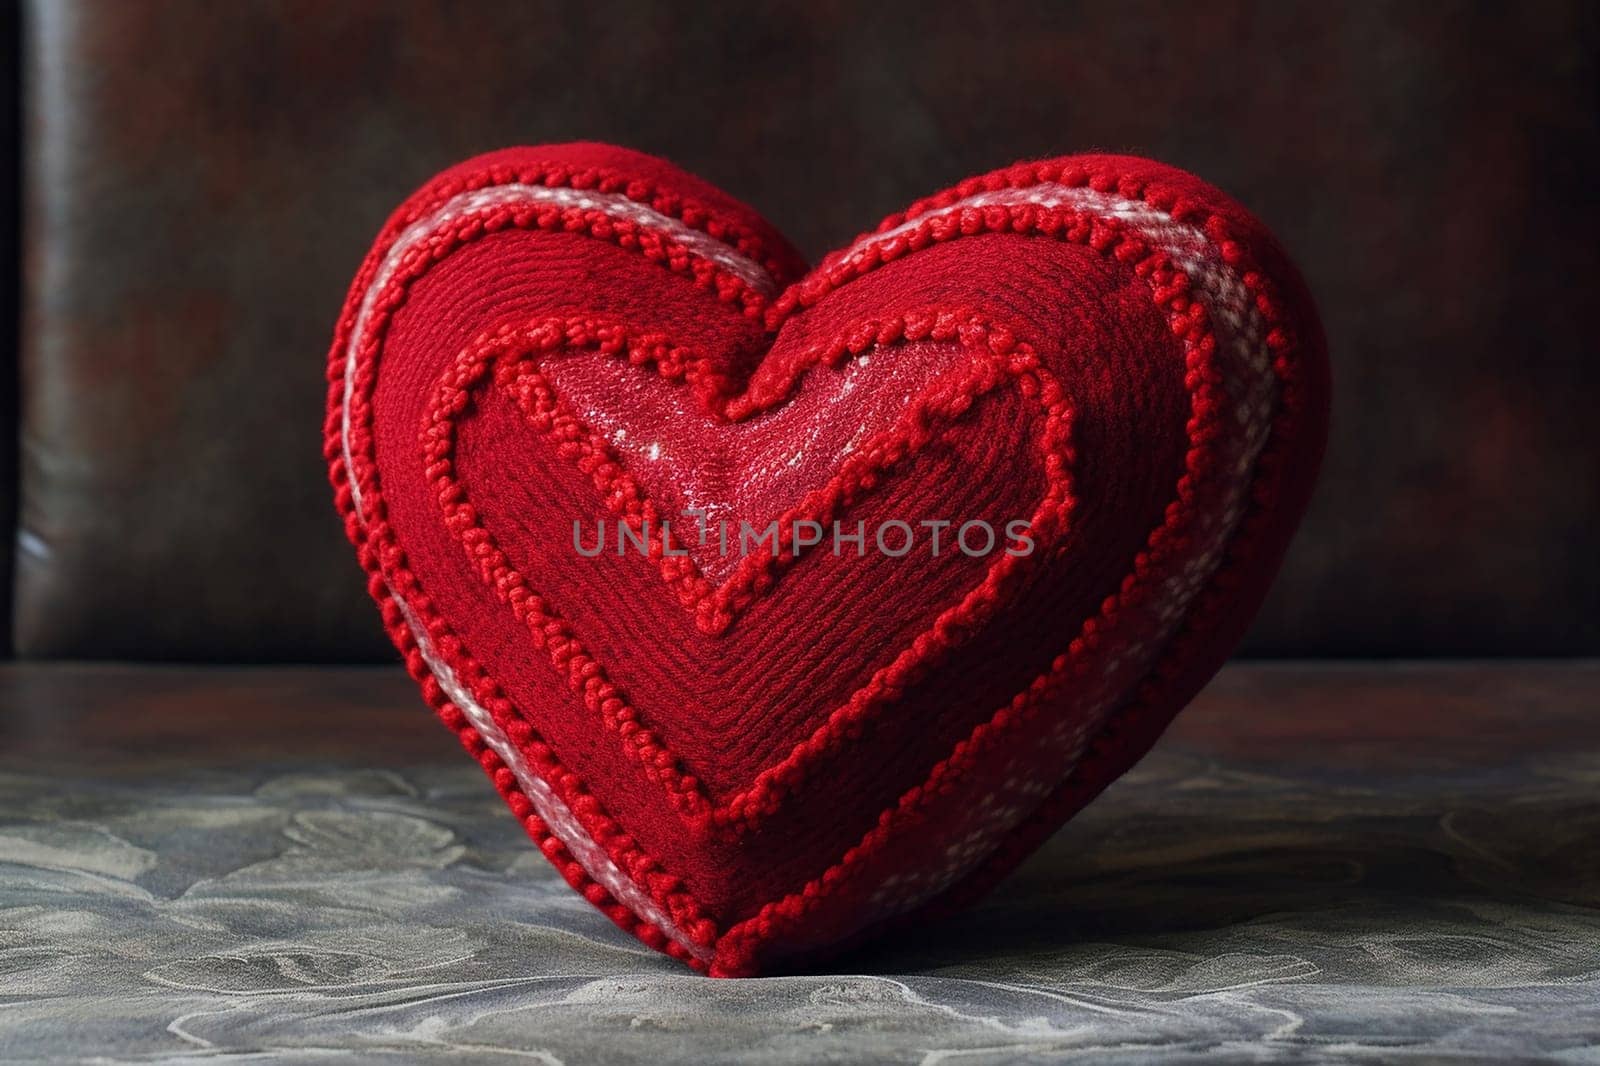 A knitted red heart-shaped cushion on a dark textured background.